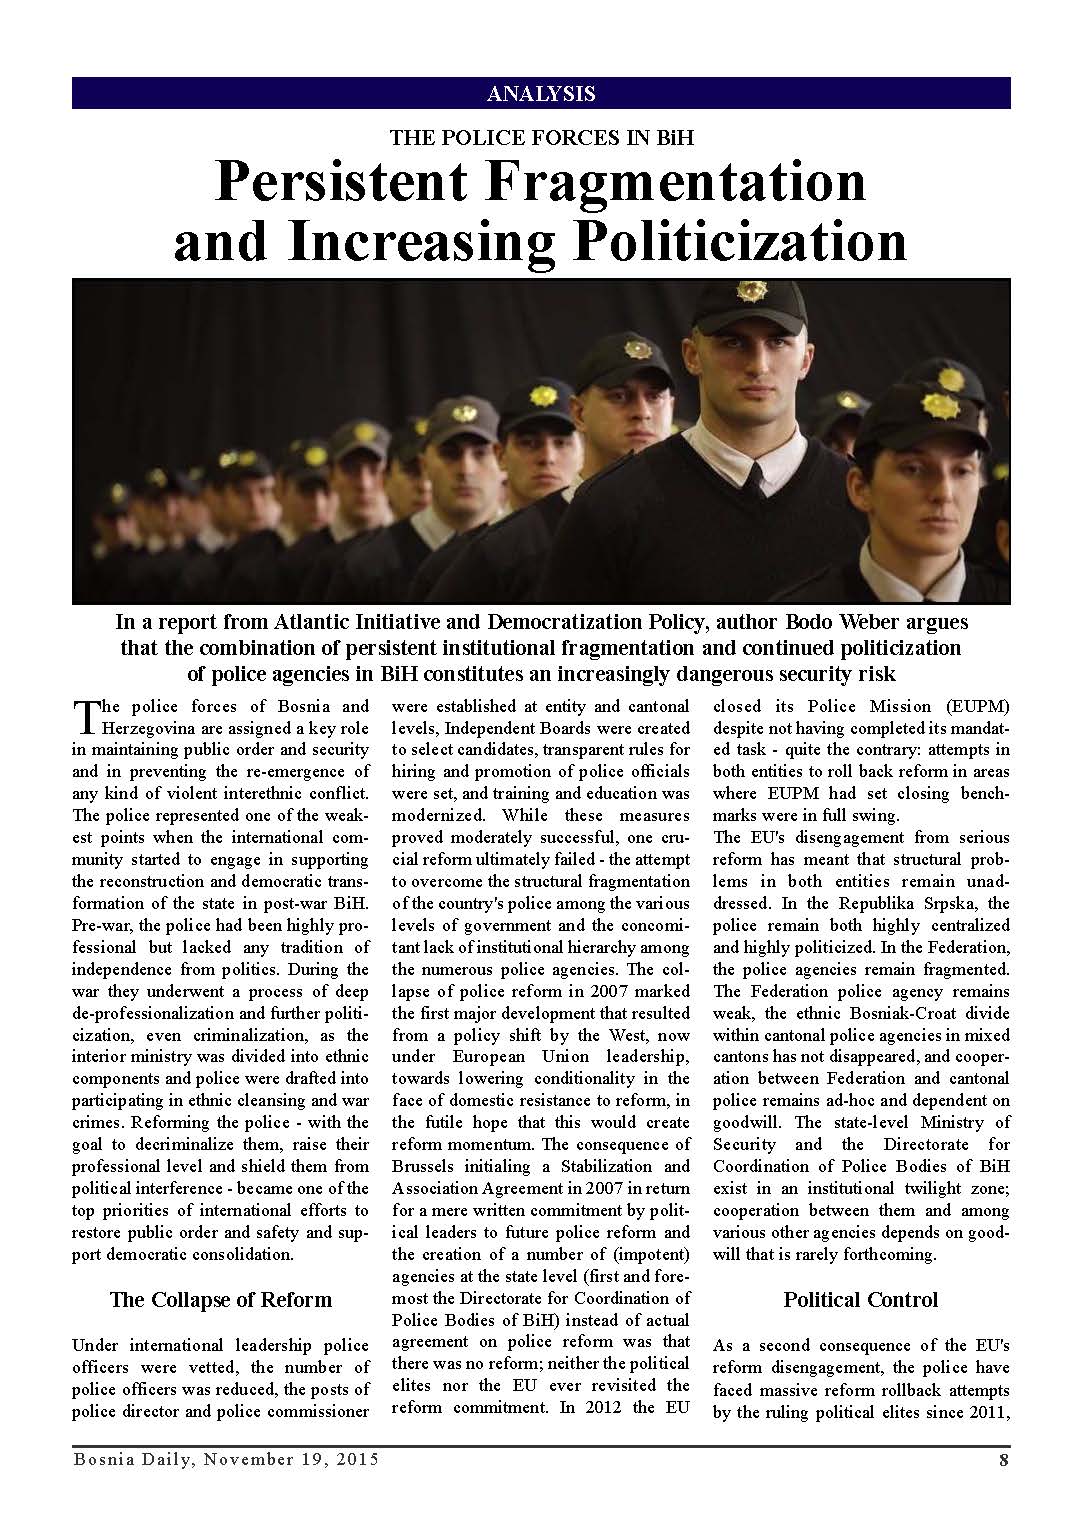 DPC BOSNIA DAILY: The Police Forces In BiH. Persistent Fragmentation and Increasing Politicization